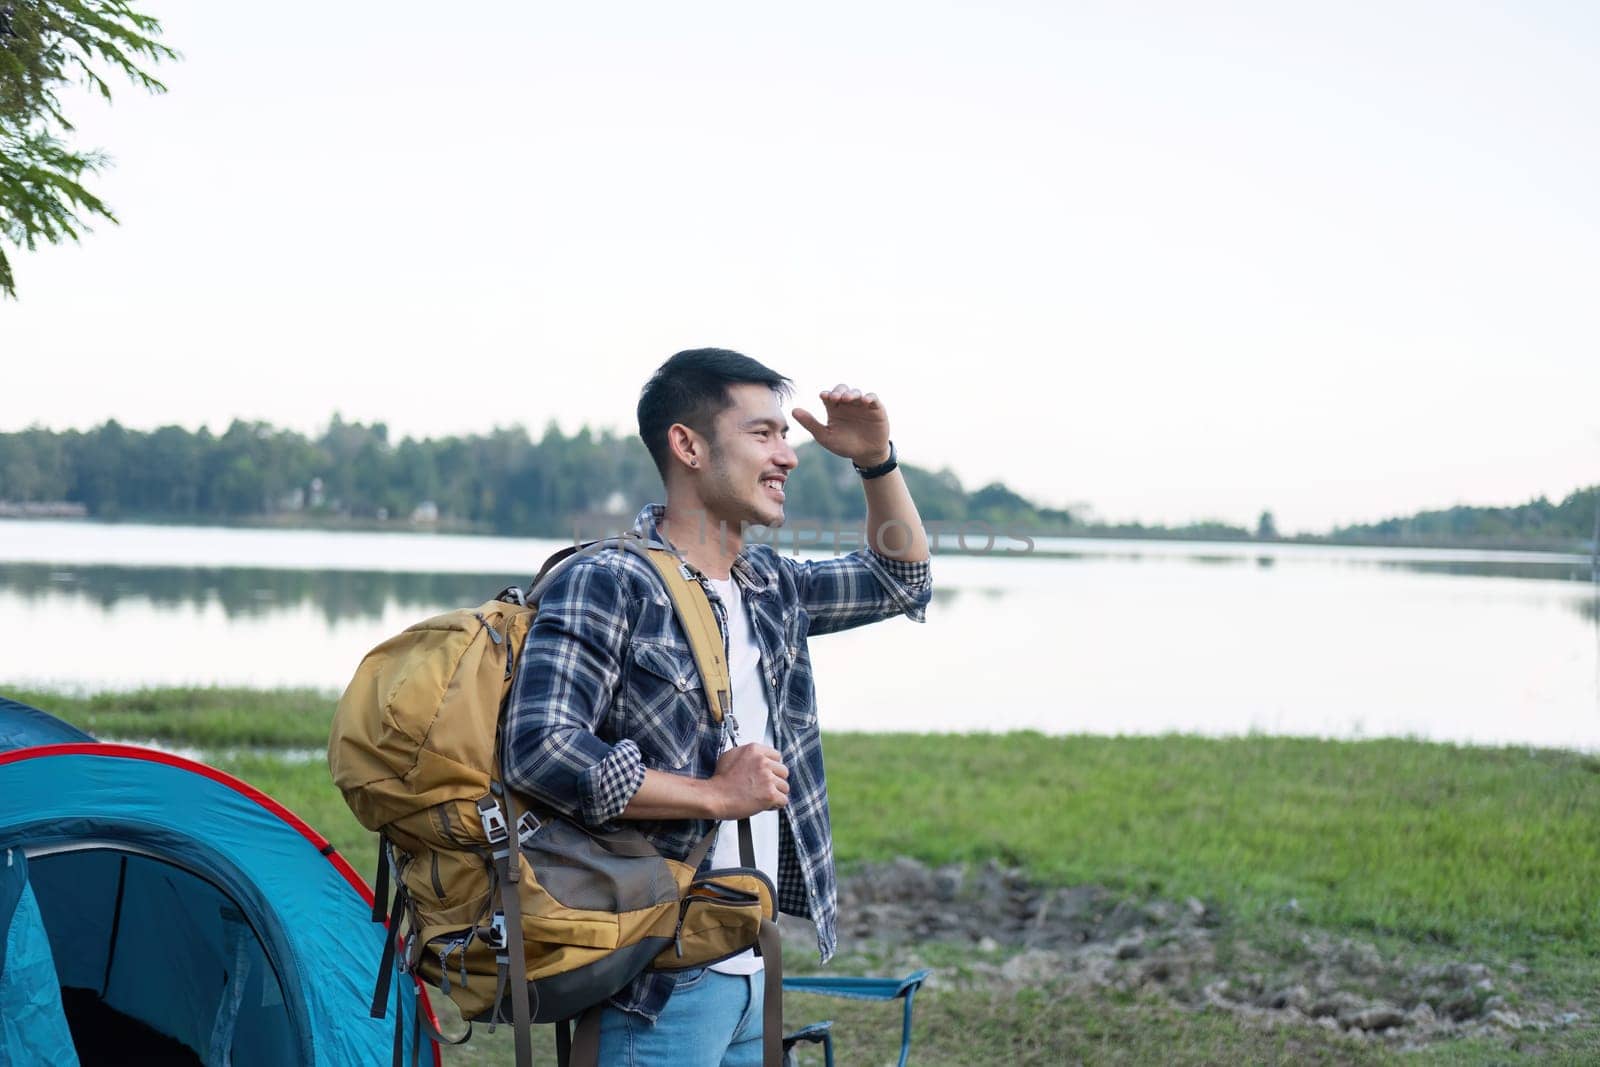 Asian tourist smiling happily Backpacker, hiking trips, outdoor activities on vacation..